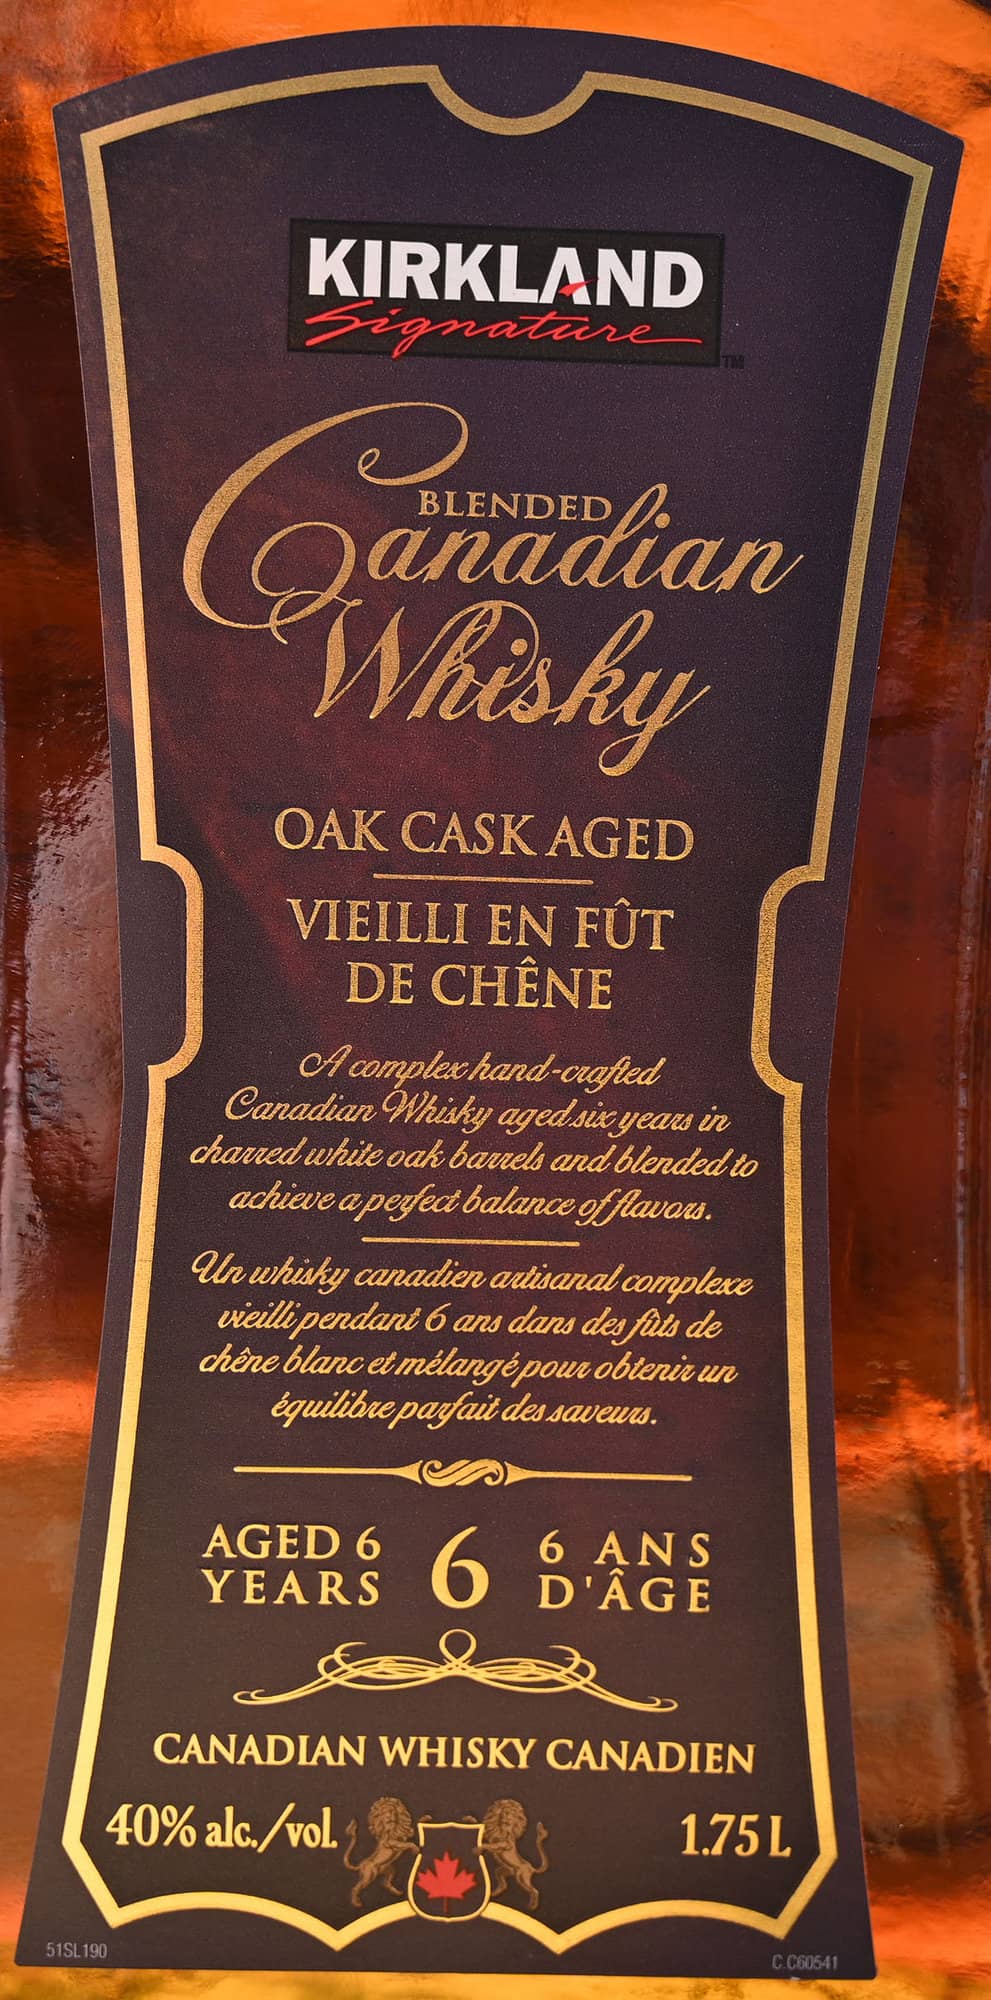 Image of the front label on the Kirkland Signature Blended Canadian Whisky.